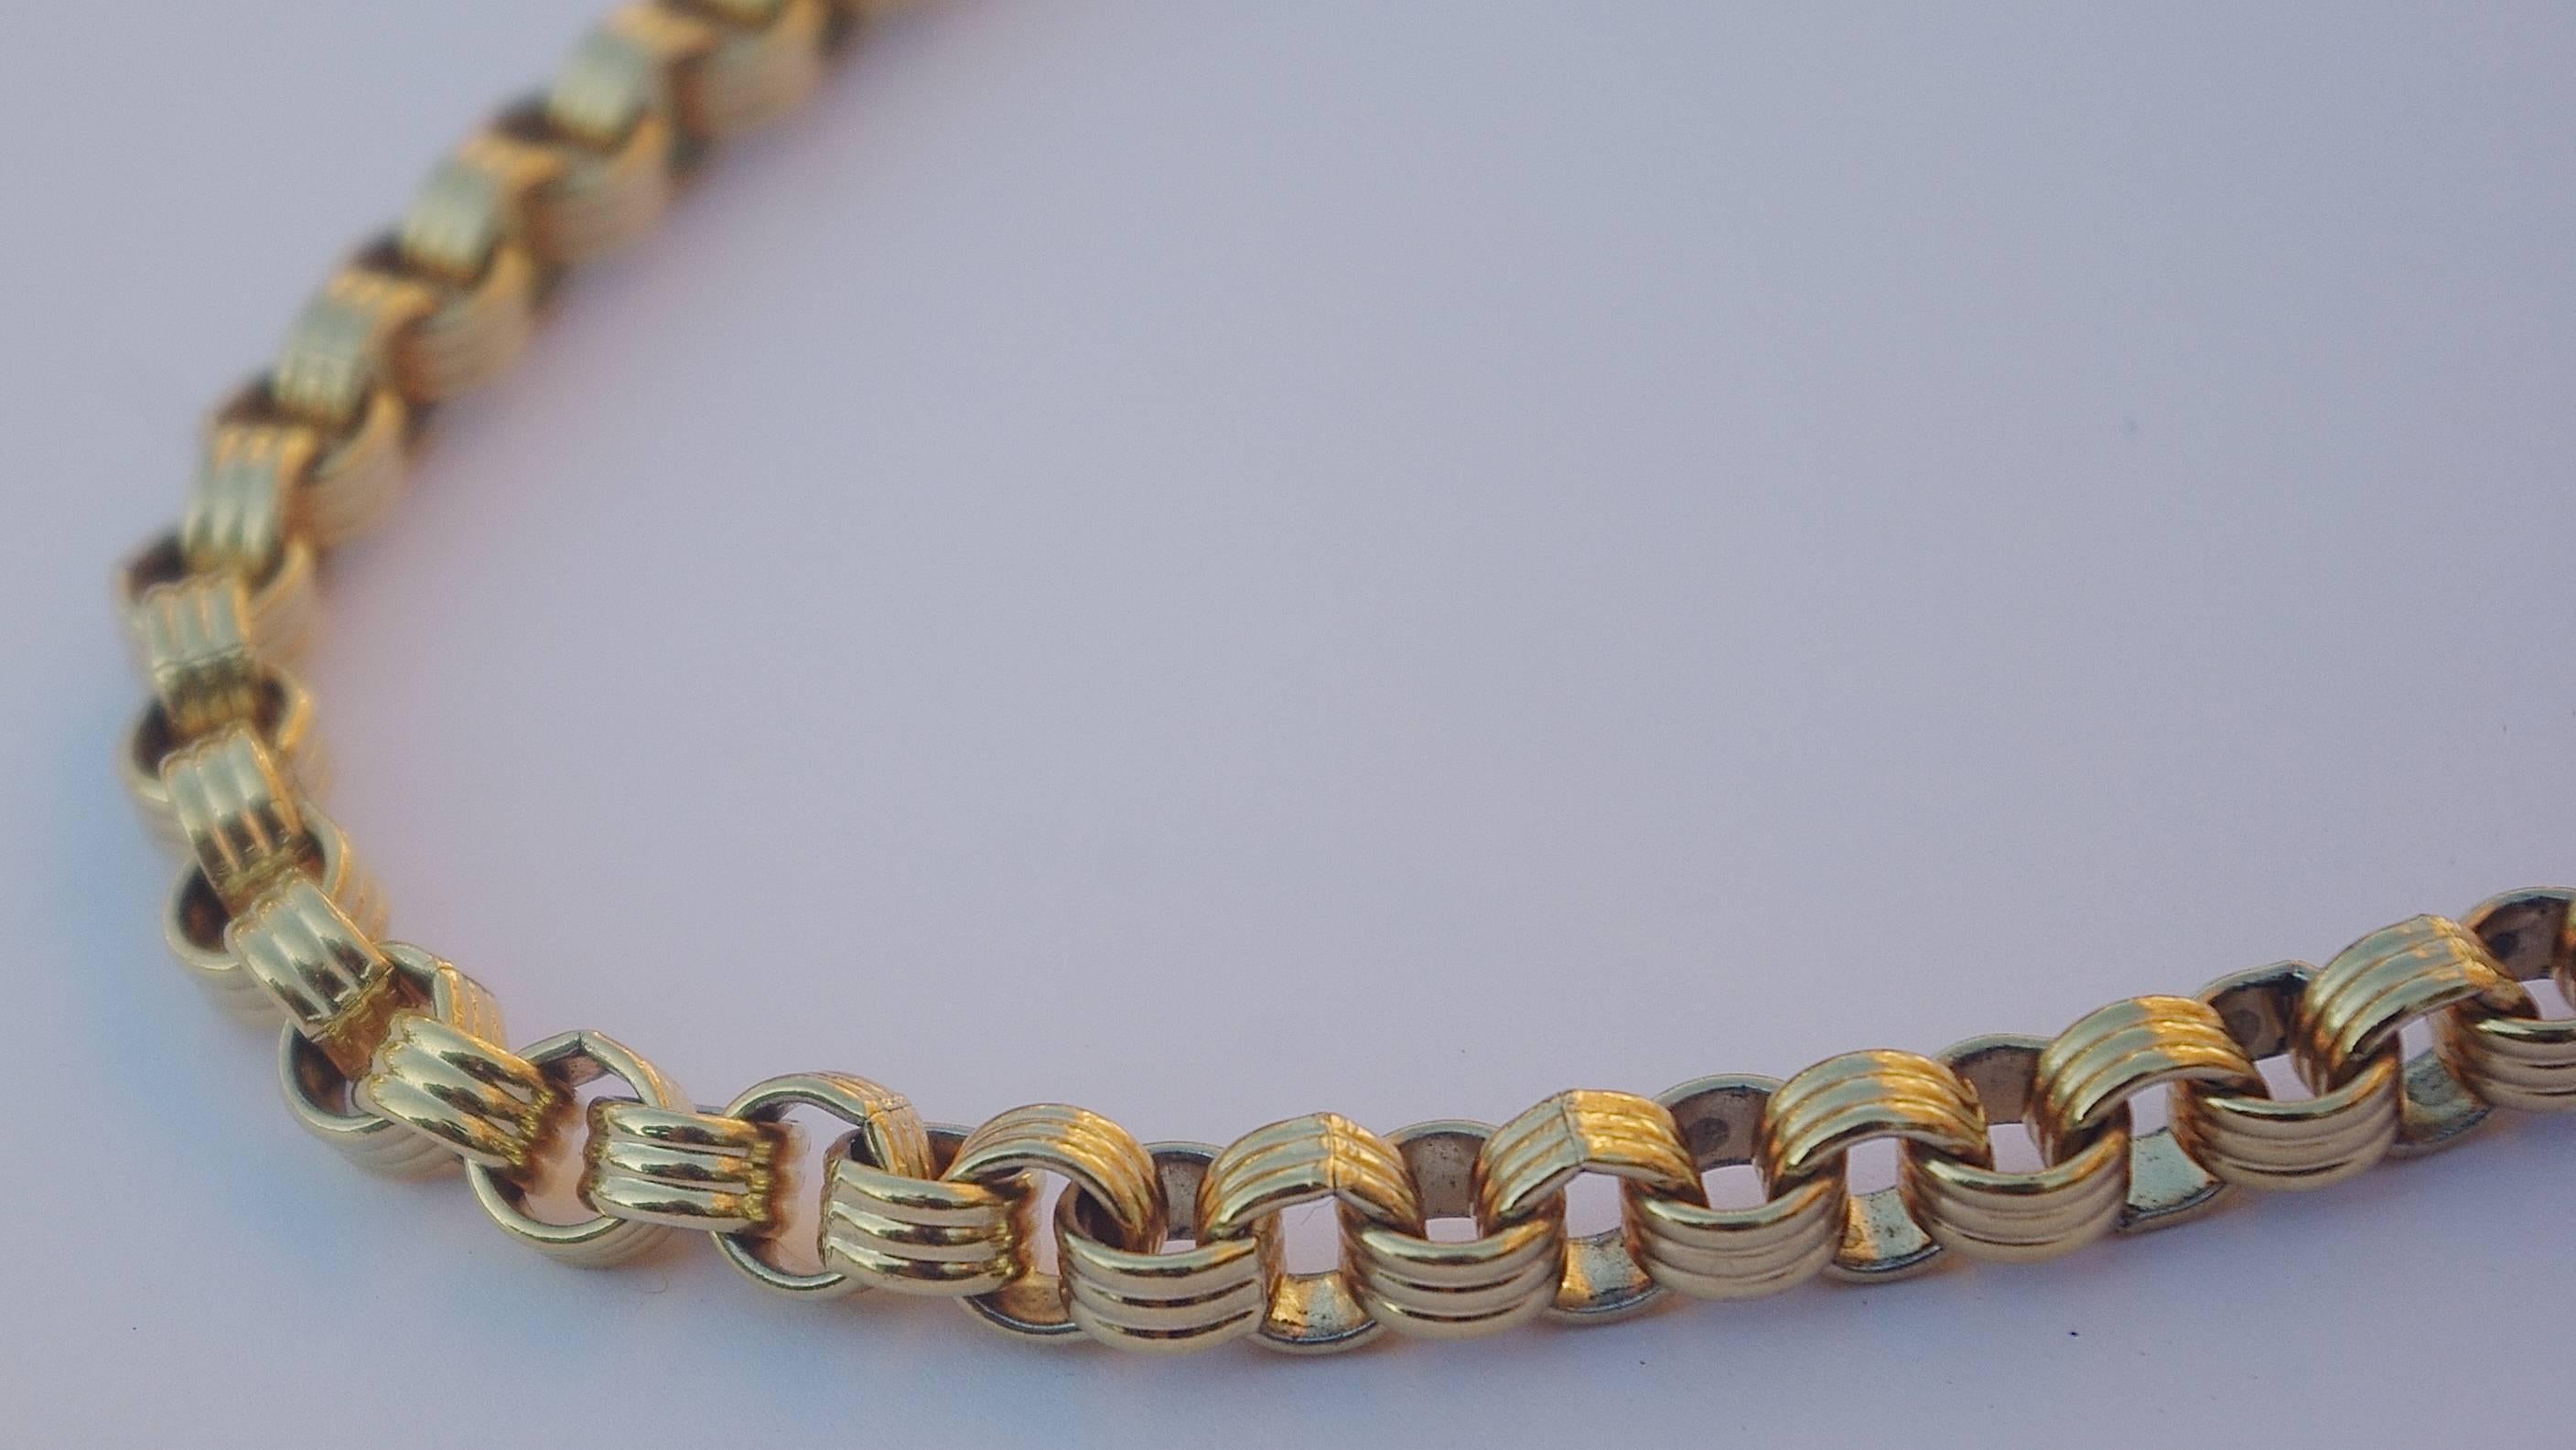 Givenchy beautiful gold plated chunky chain vintage necklace. This is a heavy piece. Length 24